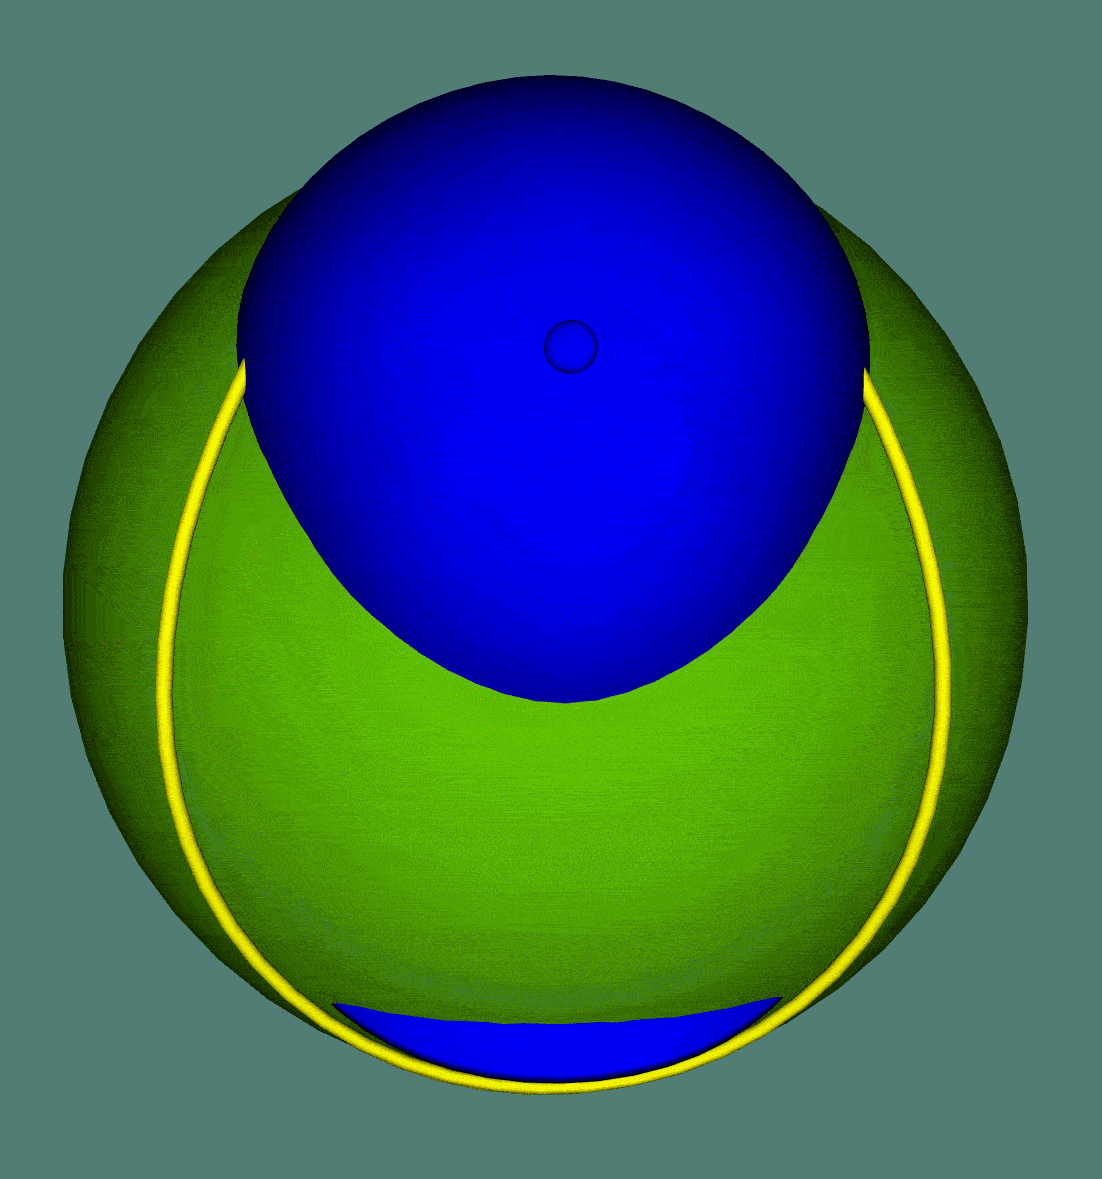 Animation of single baseball cap in relation to baseball curve in 3D